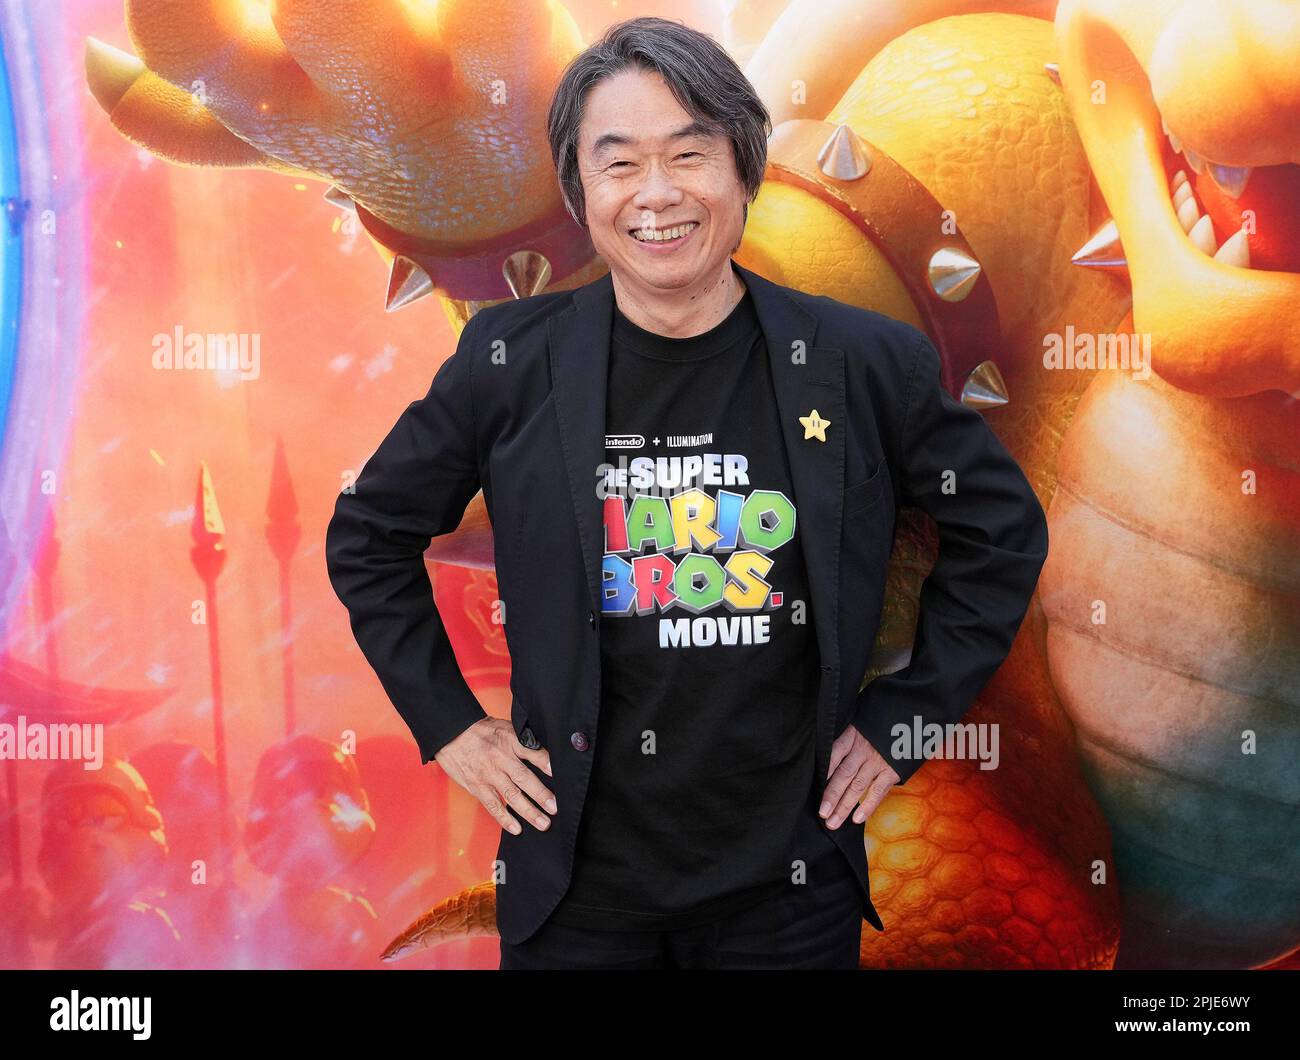 Los Angeles, USA. 01st Apr, 2023. Shigeru Miyamoto arrives at Universal  Pictures' THE SUPER MARIO BROS. MOVIE Special Screening held at the Regal  LA Live in Los Angeles, CA on Saturday, April